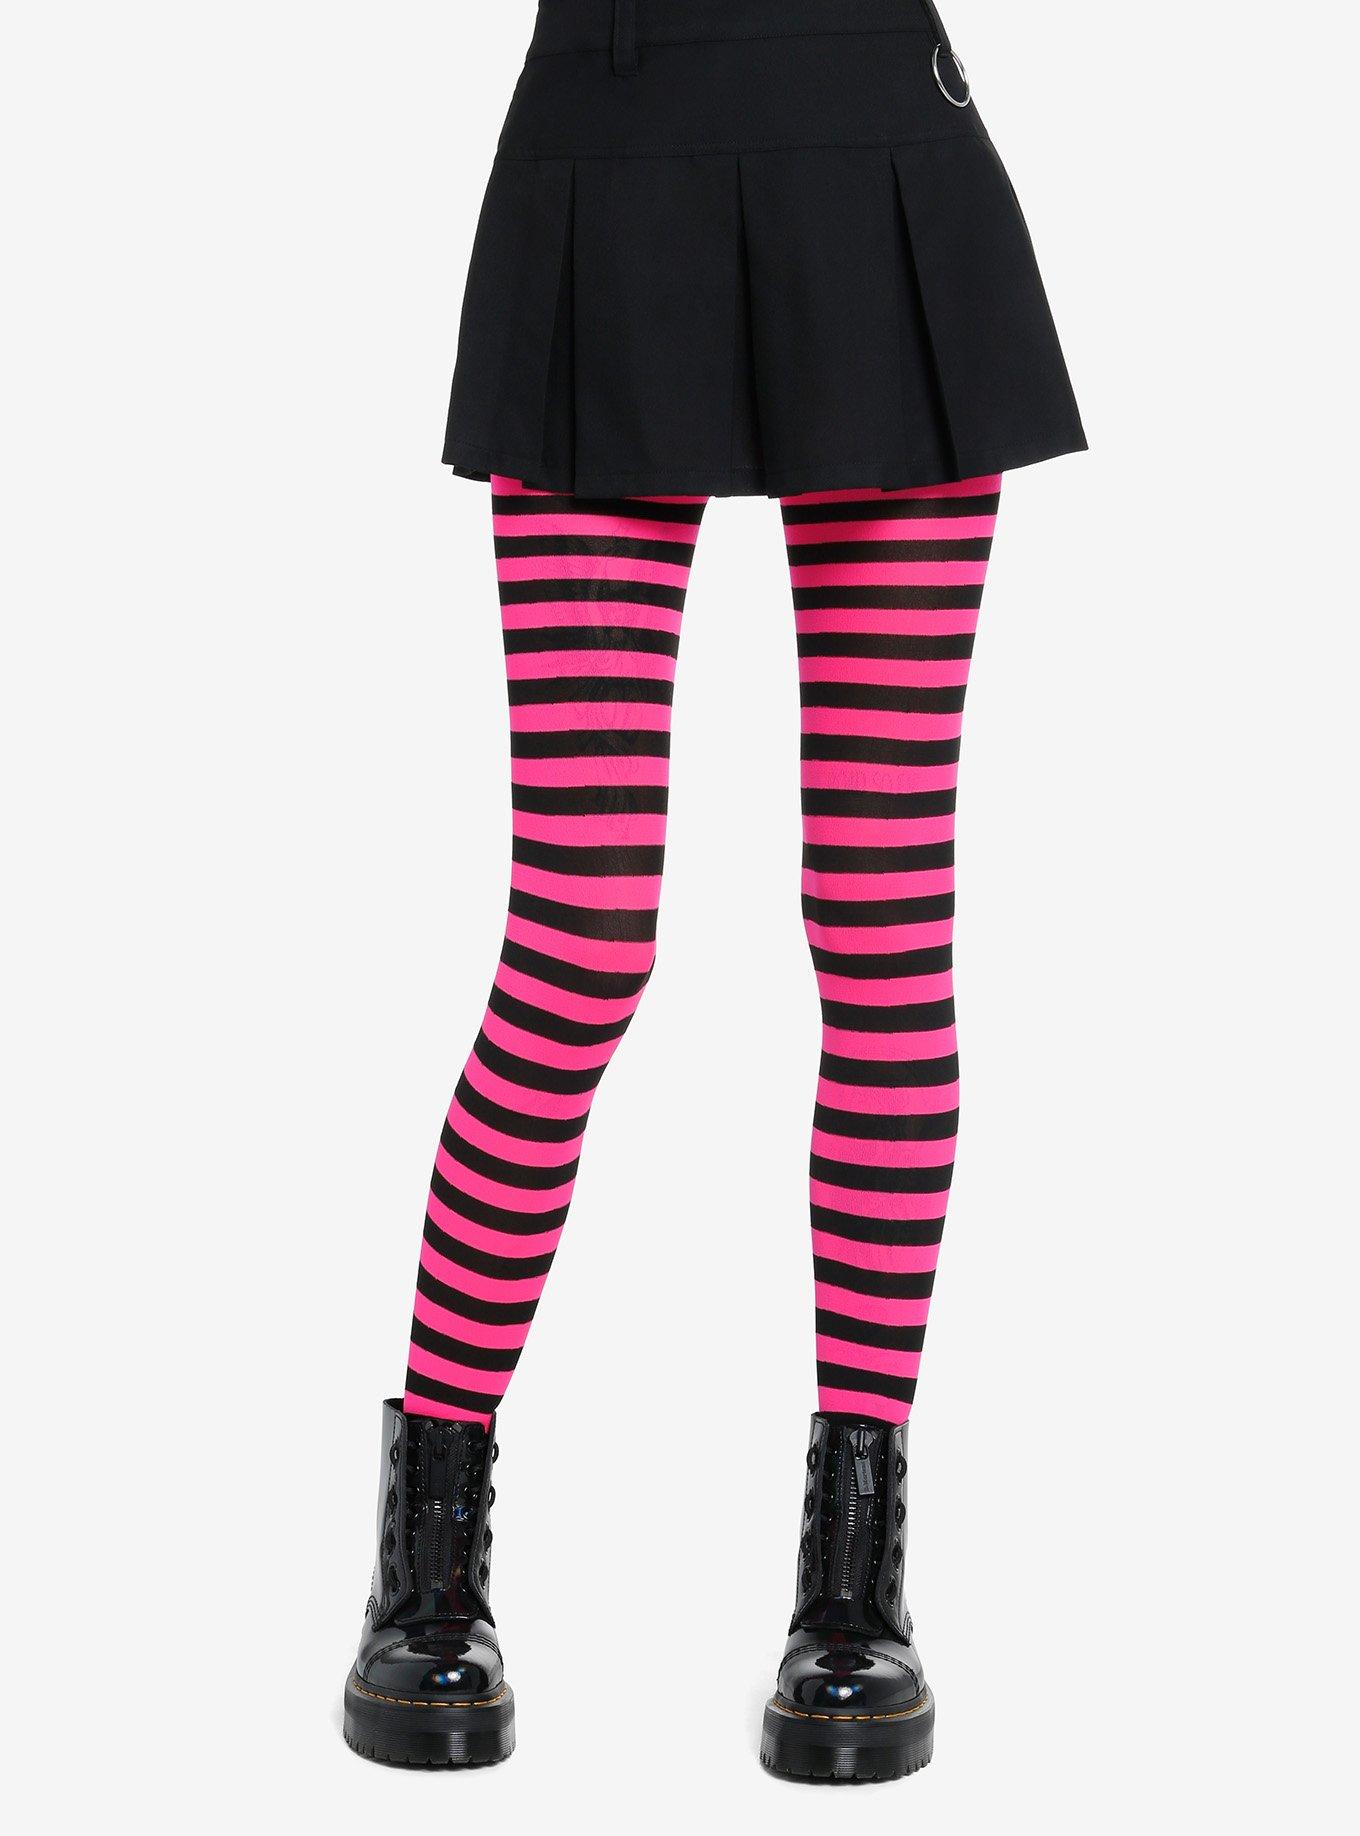 Hot Topic One Size Pantyhose and Tights for Women for sale